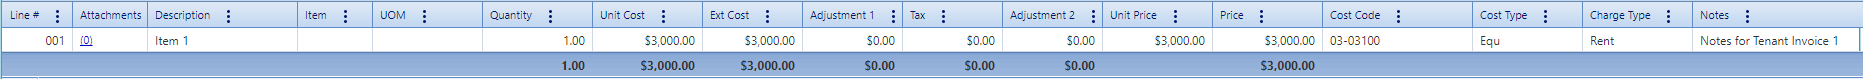 4. Tenant Invoices Details Tab Table